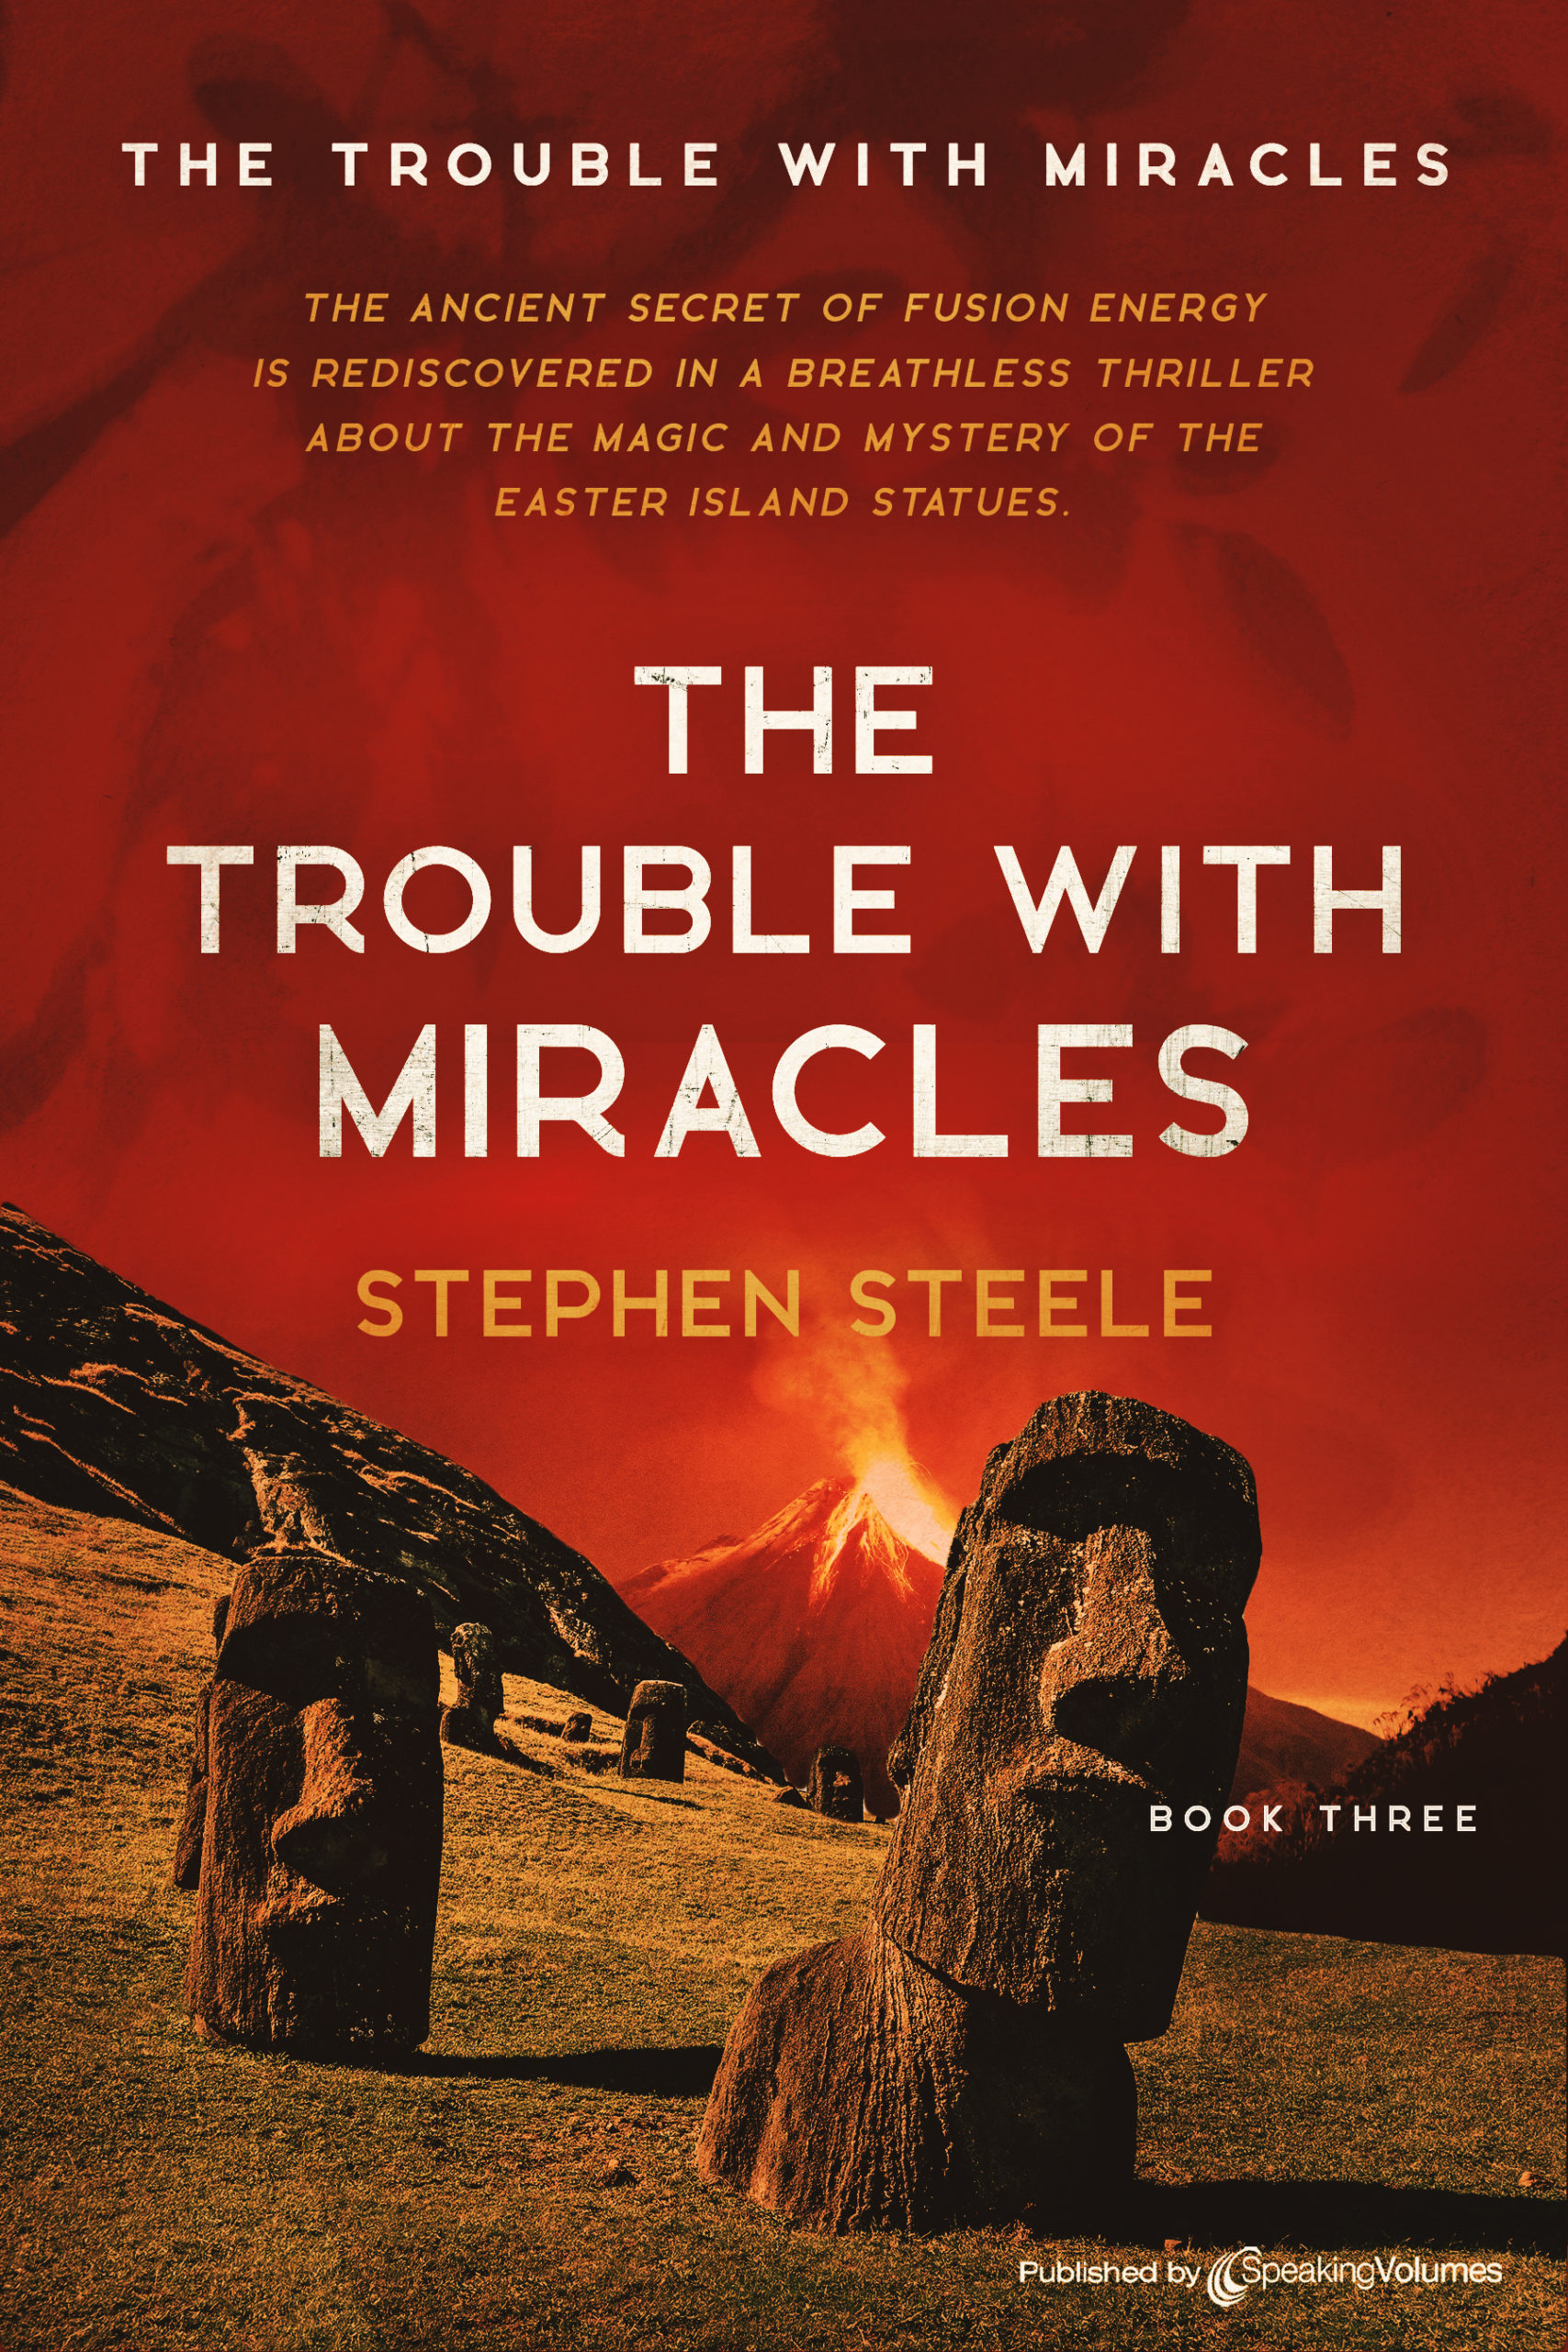 The Trouble With Miracles by Stephen Steele